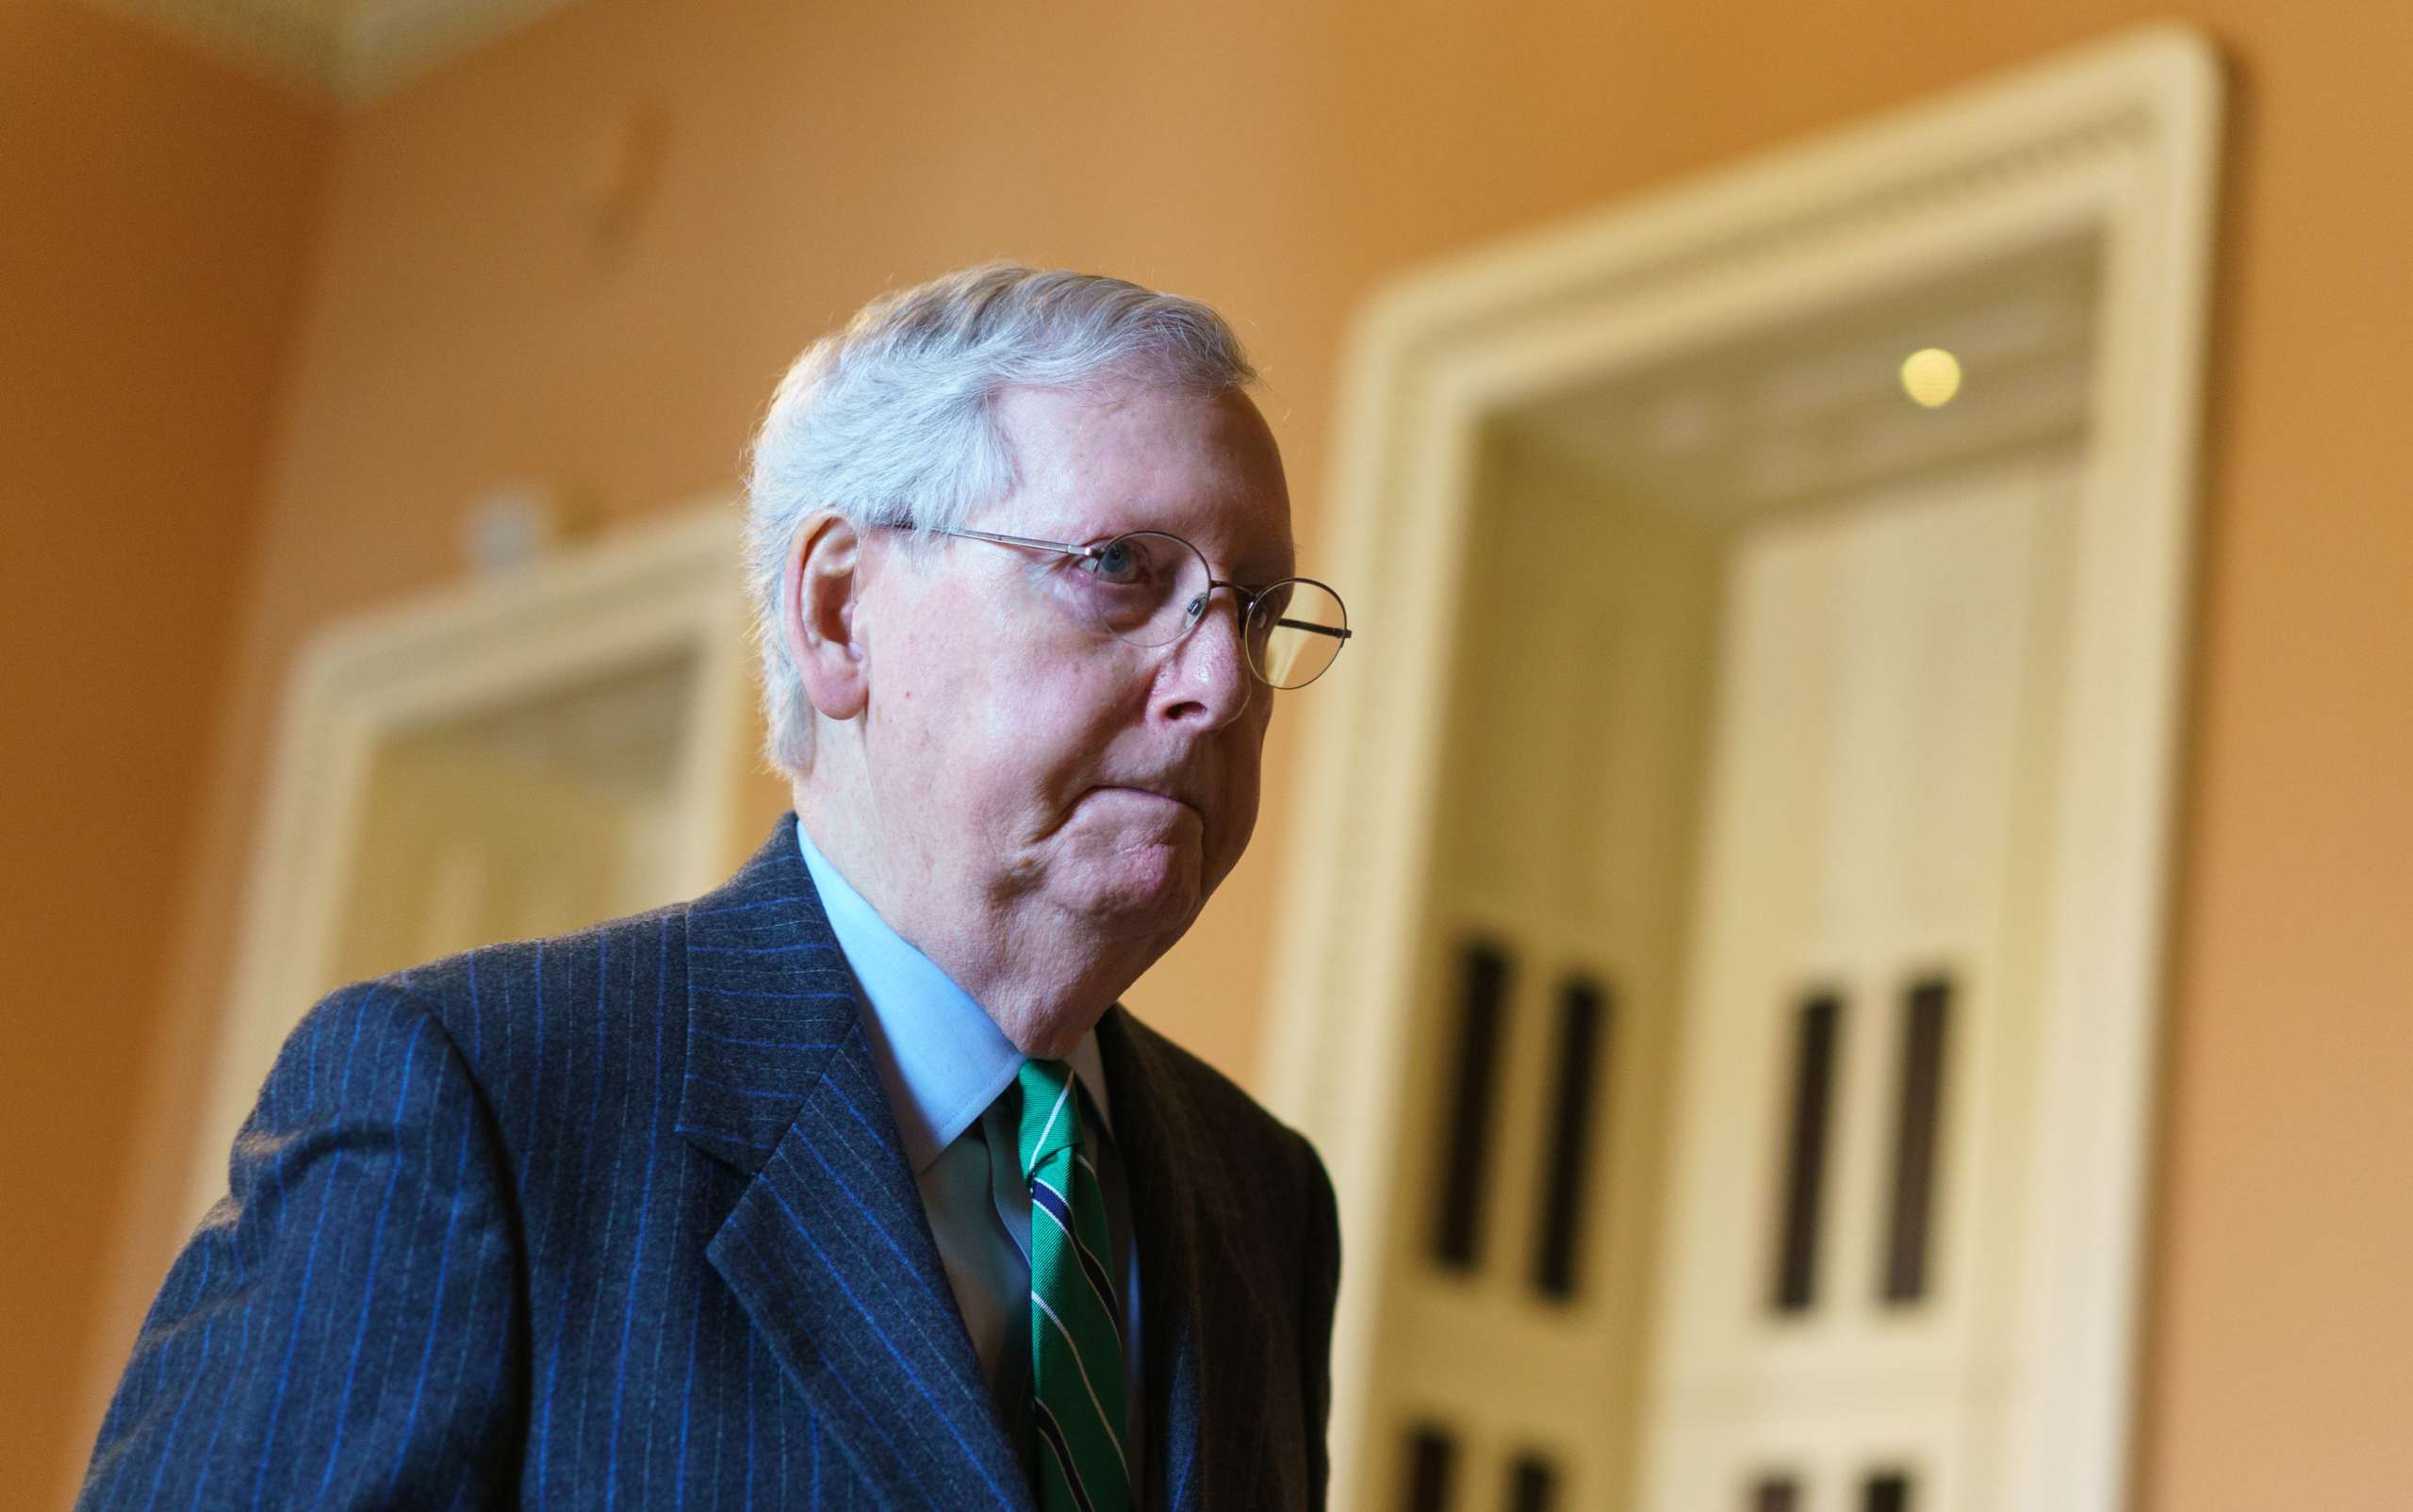 2020_0323-mitch-mcconnell-scaled.jpg